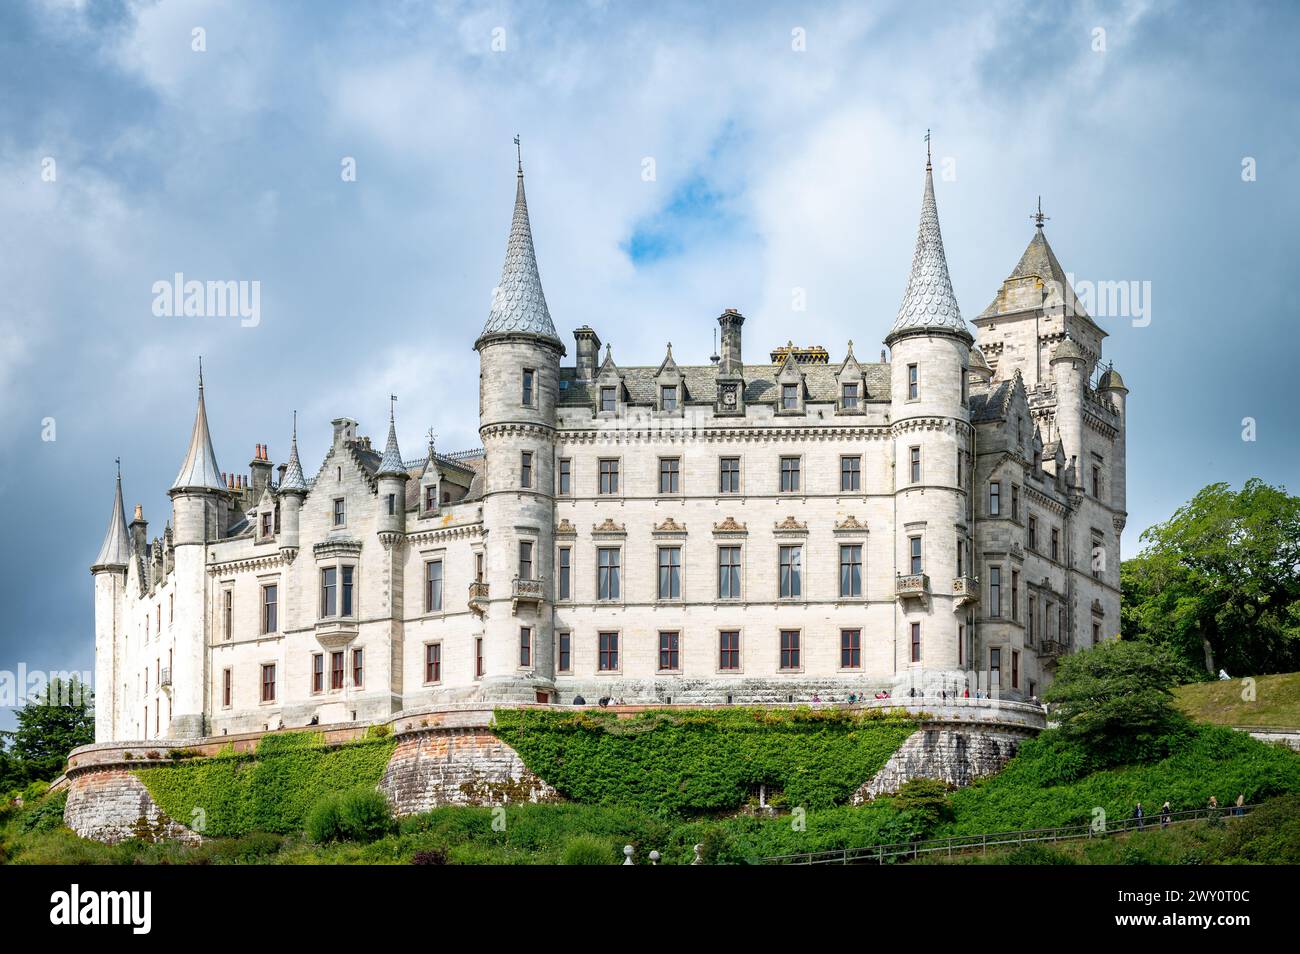 View of the Dunrobin Castle & Gardens, Golspie, Sutherland family, Northern Highlands, Scotland, UK Stock Photo